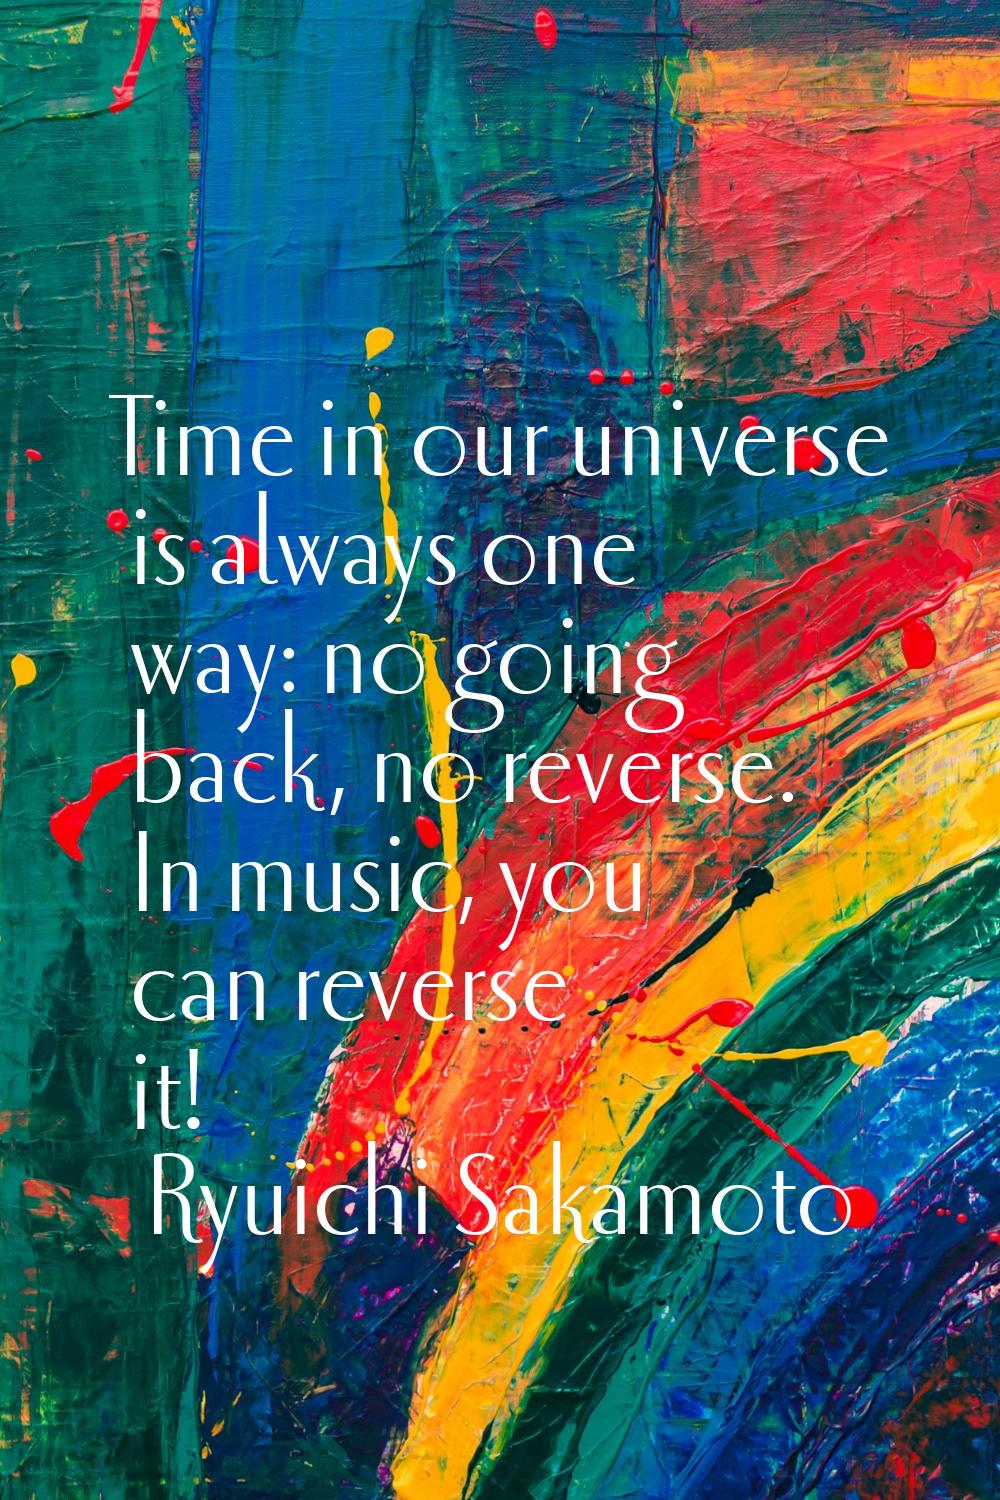 Time in our universe is always one way: no going back, no reverse. In music, you can reverse it!